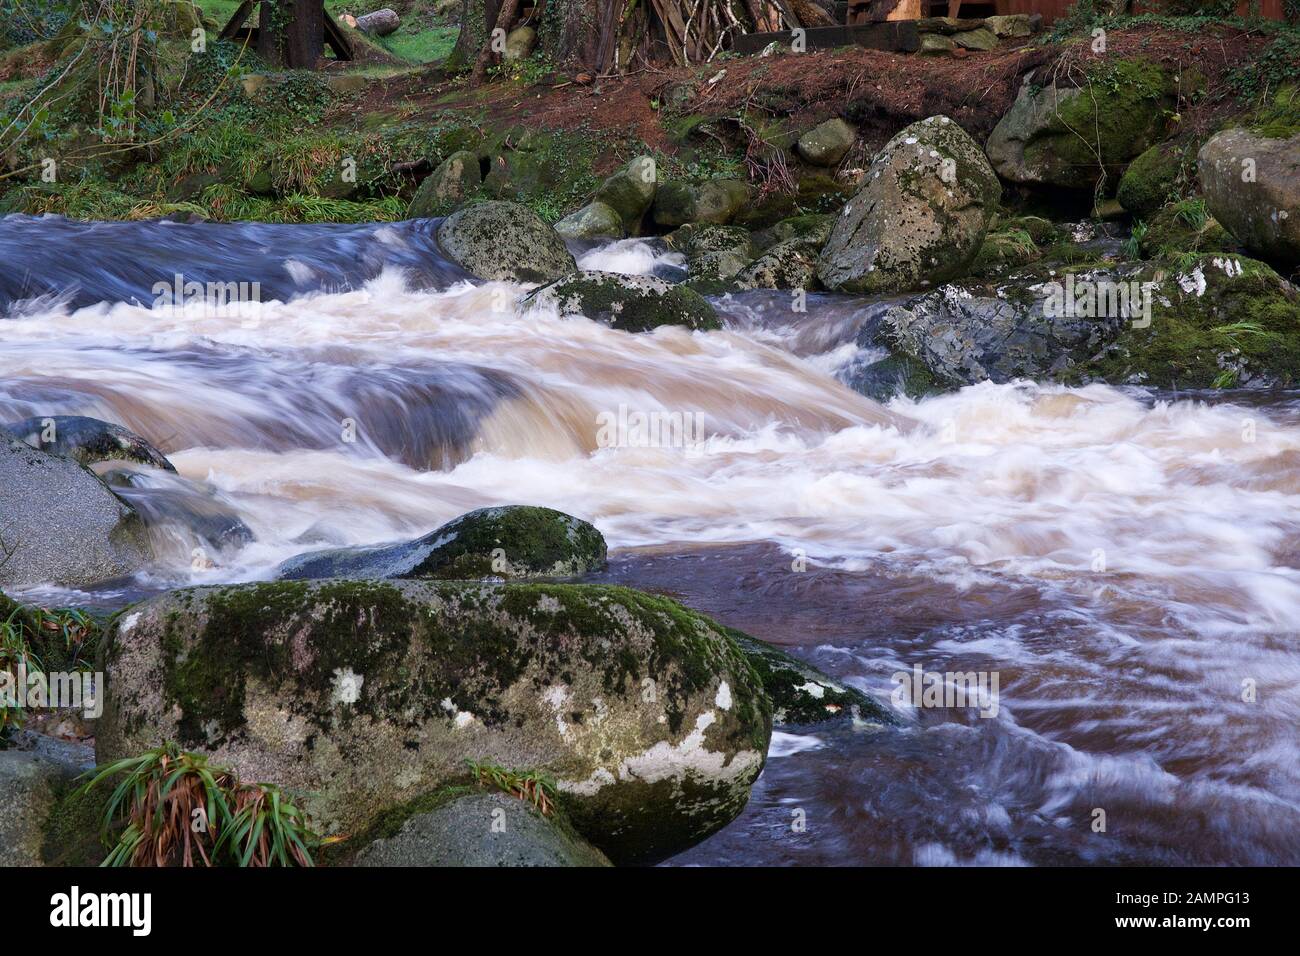 Slow exposure shot of white water rapids on a river in County Wicklow, Ireland. Stock Photo